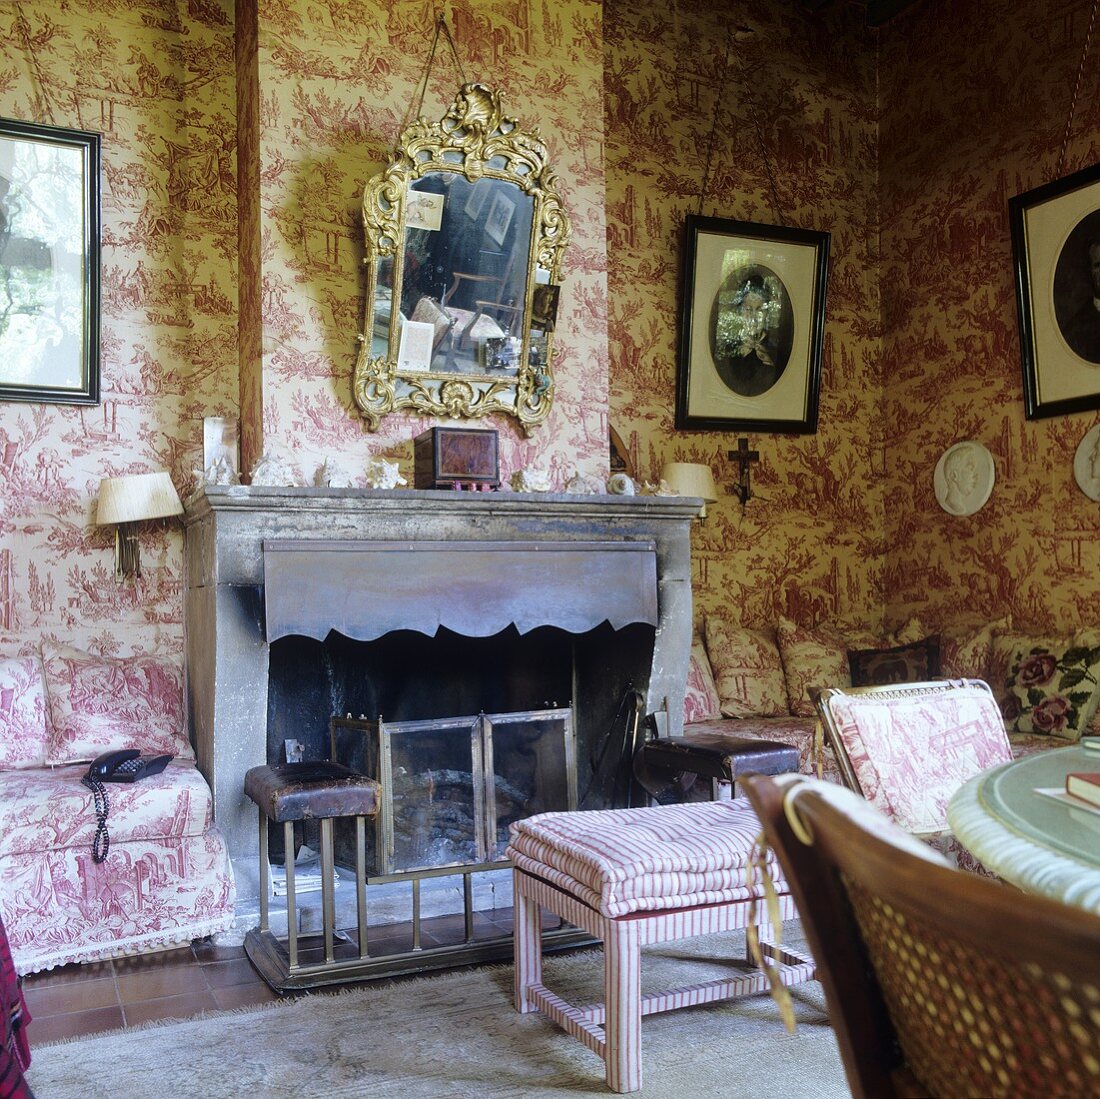 A sooty fireplace in a living room in a country house with patterned paper on the wall